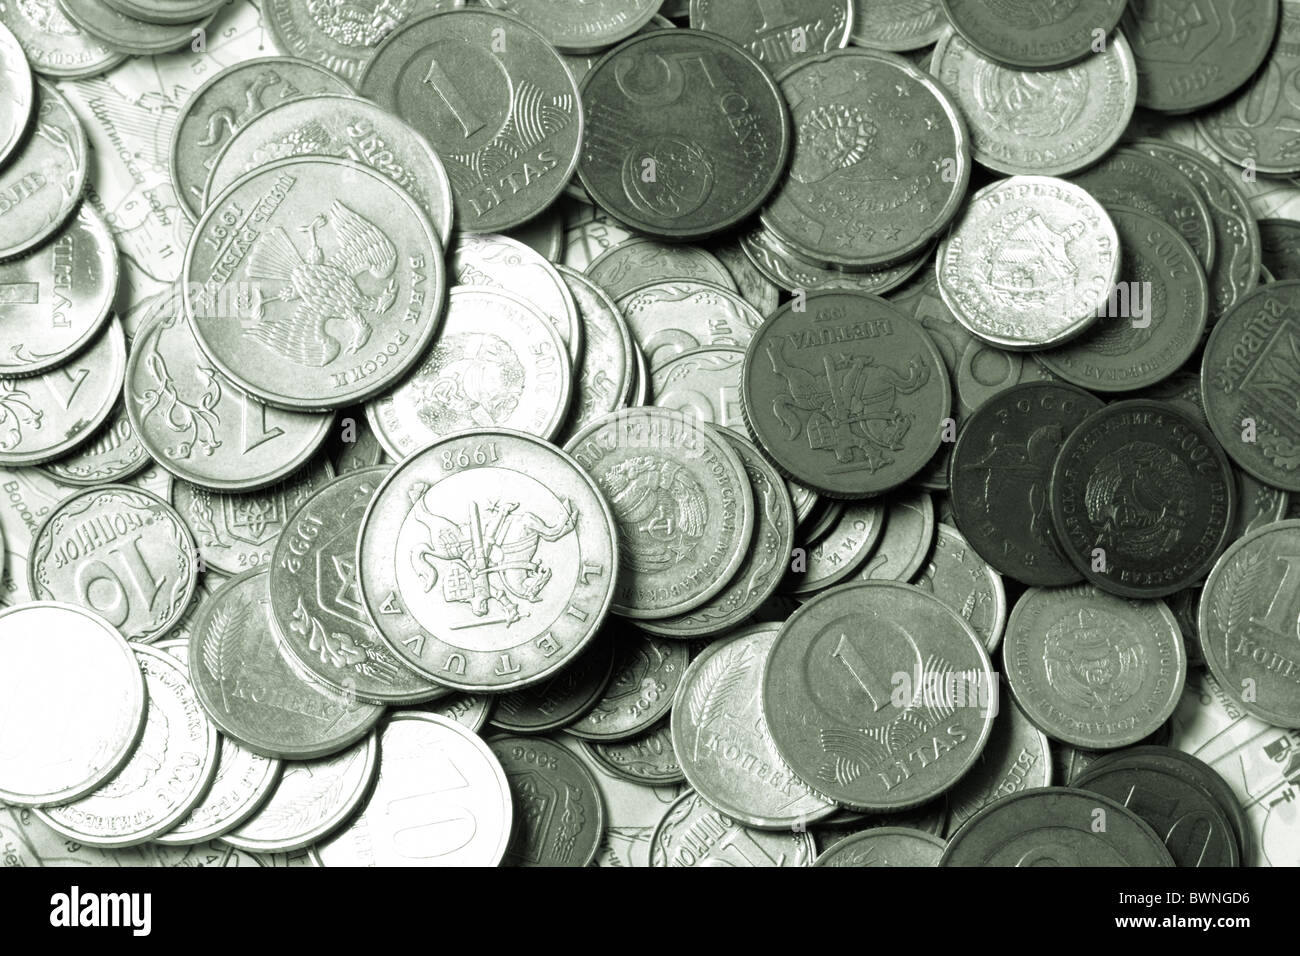 Coins lay on a map Stock Photo